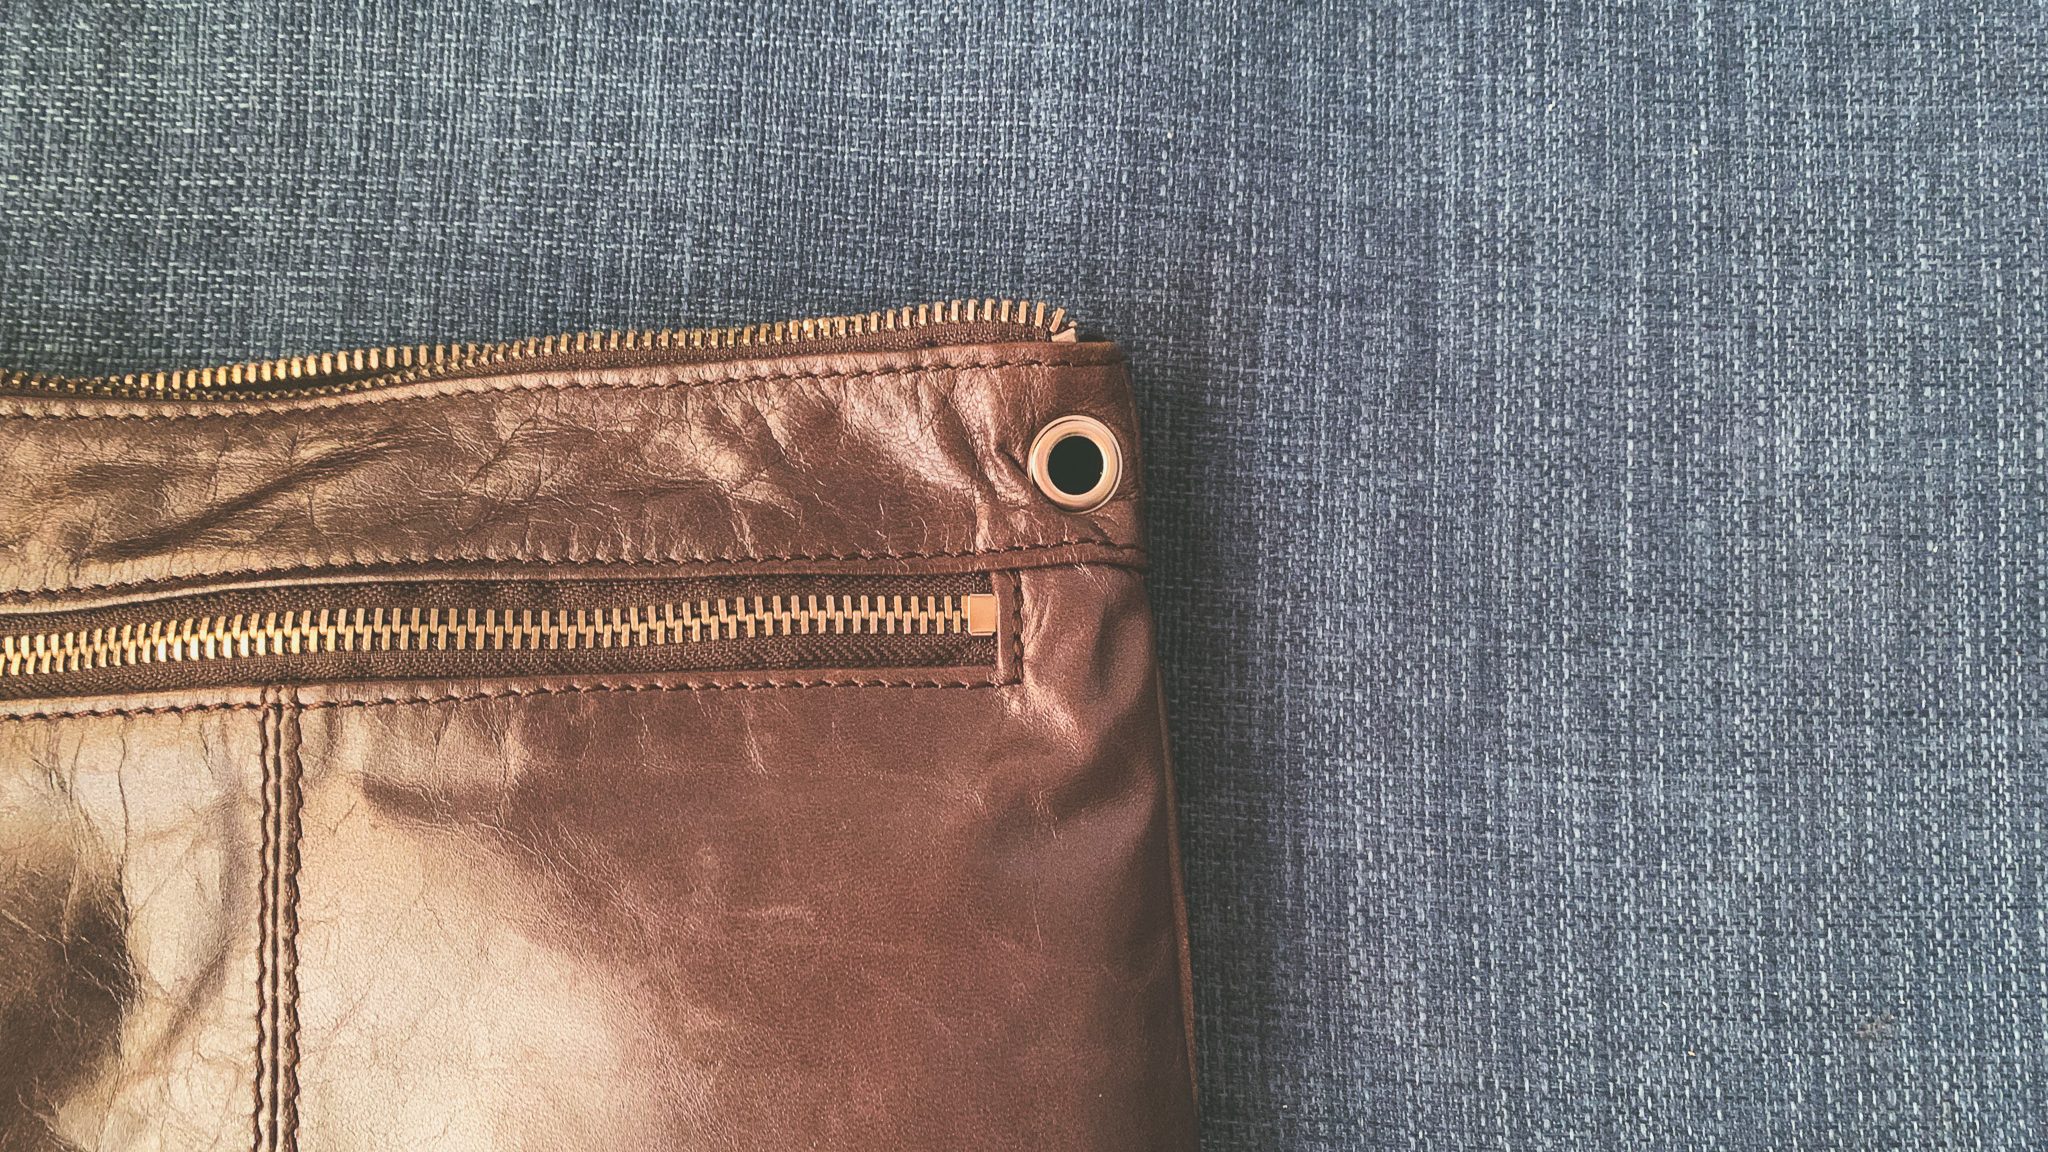 Replace the Grommet/Eyelet on a Bag